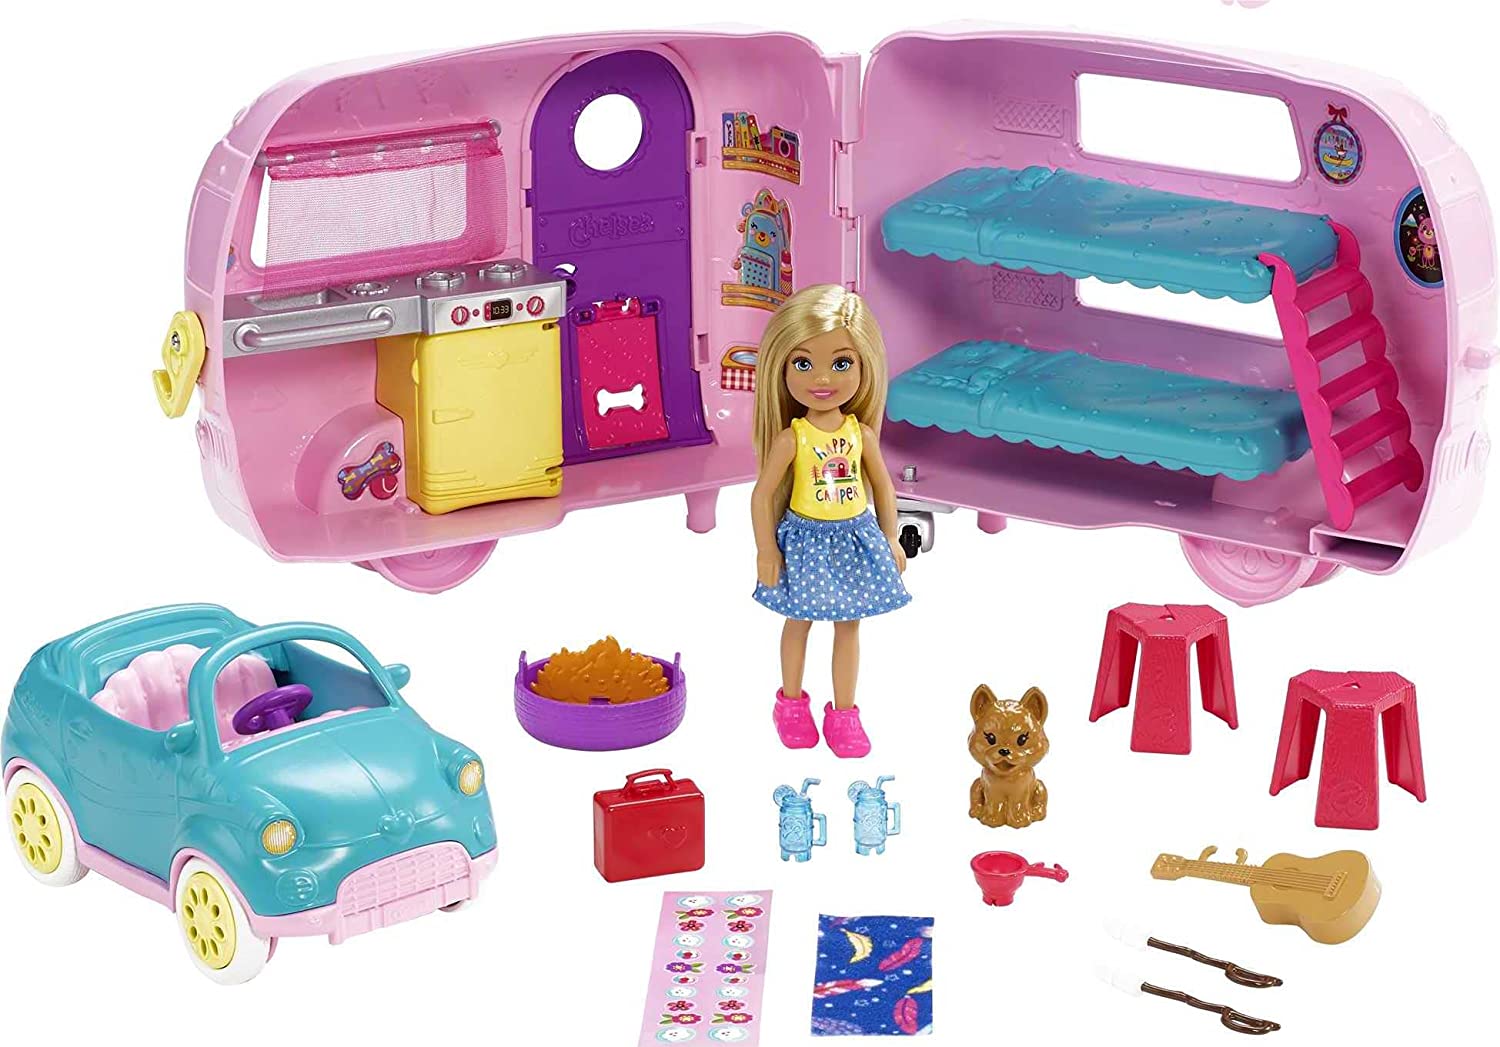 Chelsea doll and car and camper playset